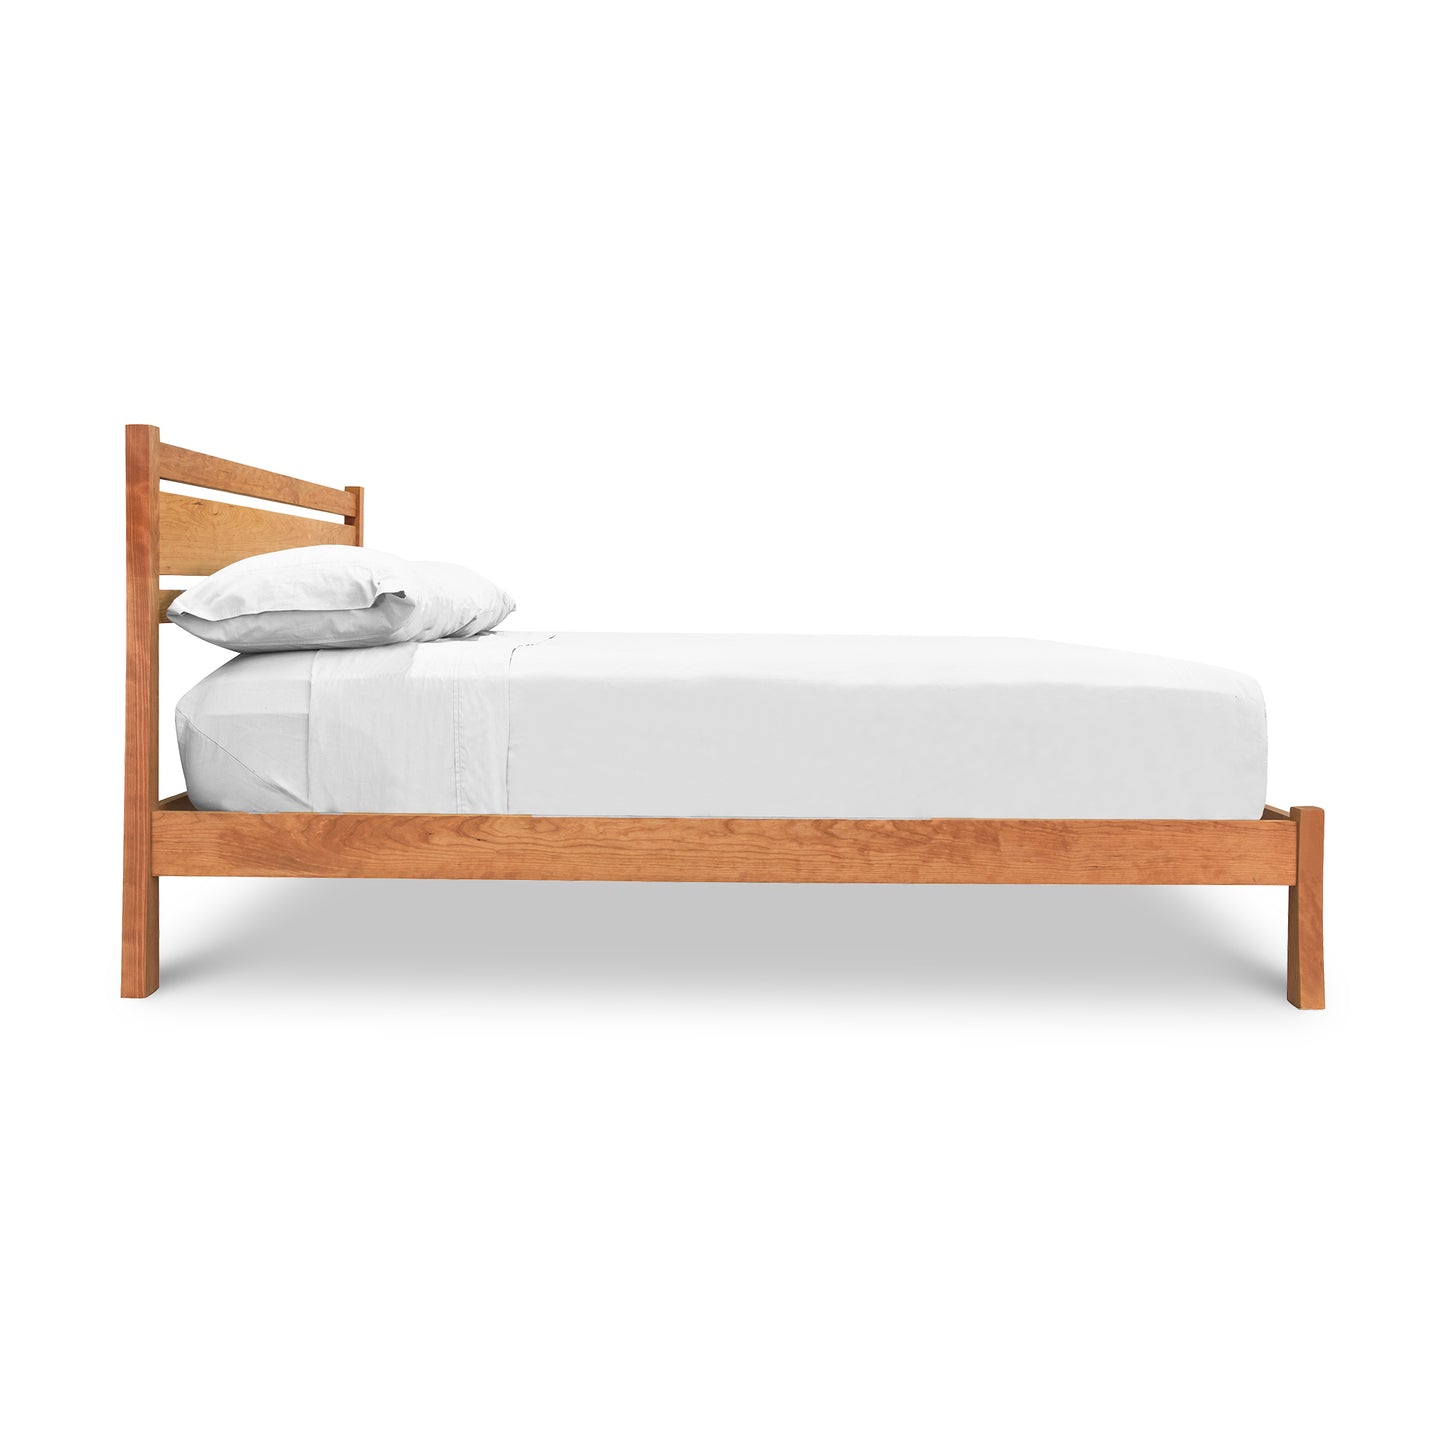 A single Horizon Platform Bed by Vermont Furniture Designs with white bedding isolated on a white background.